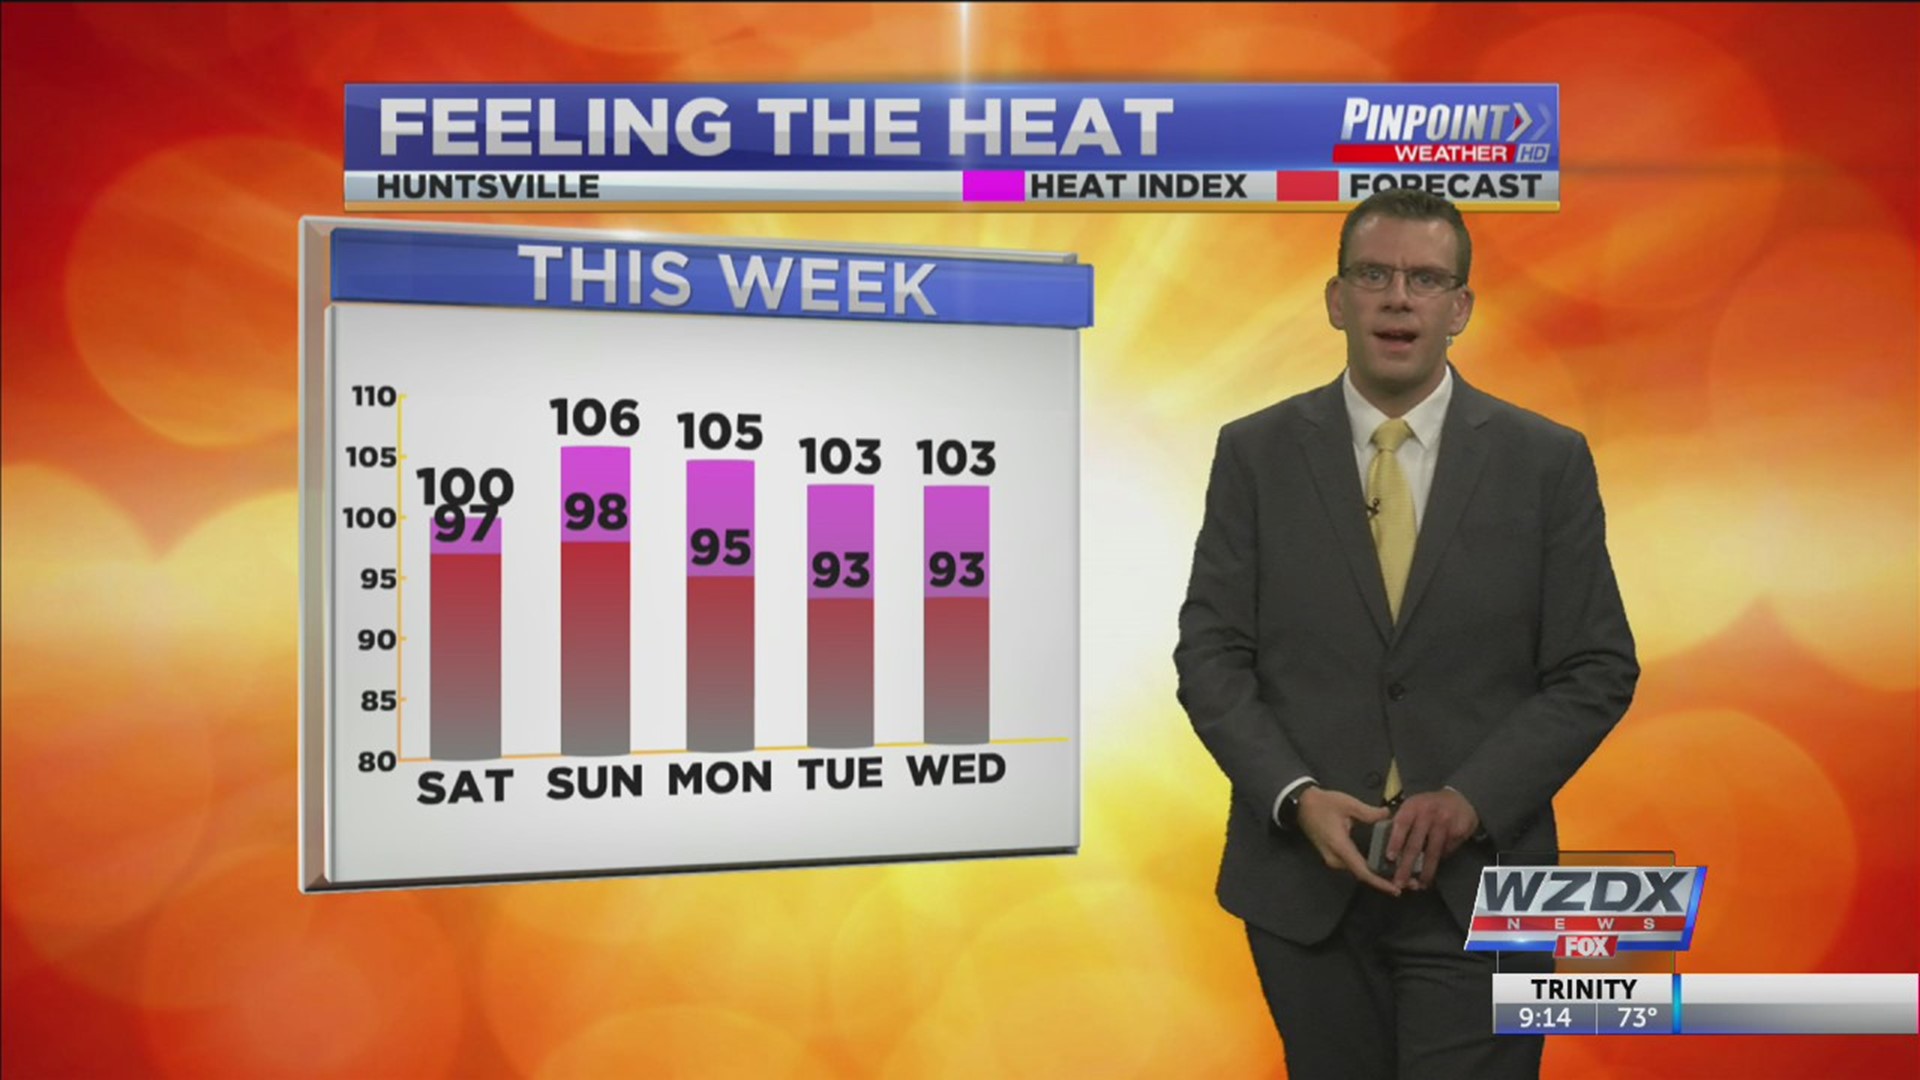 The weekend is here and the heat indices are back in the triple digits. Details inside tonight's forecast.